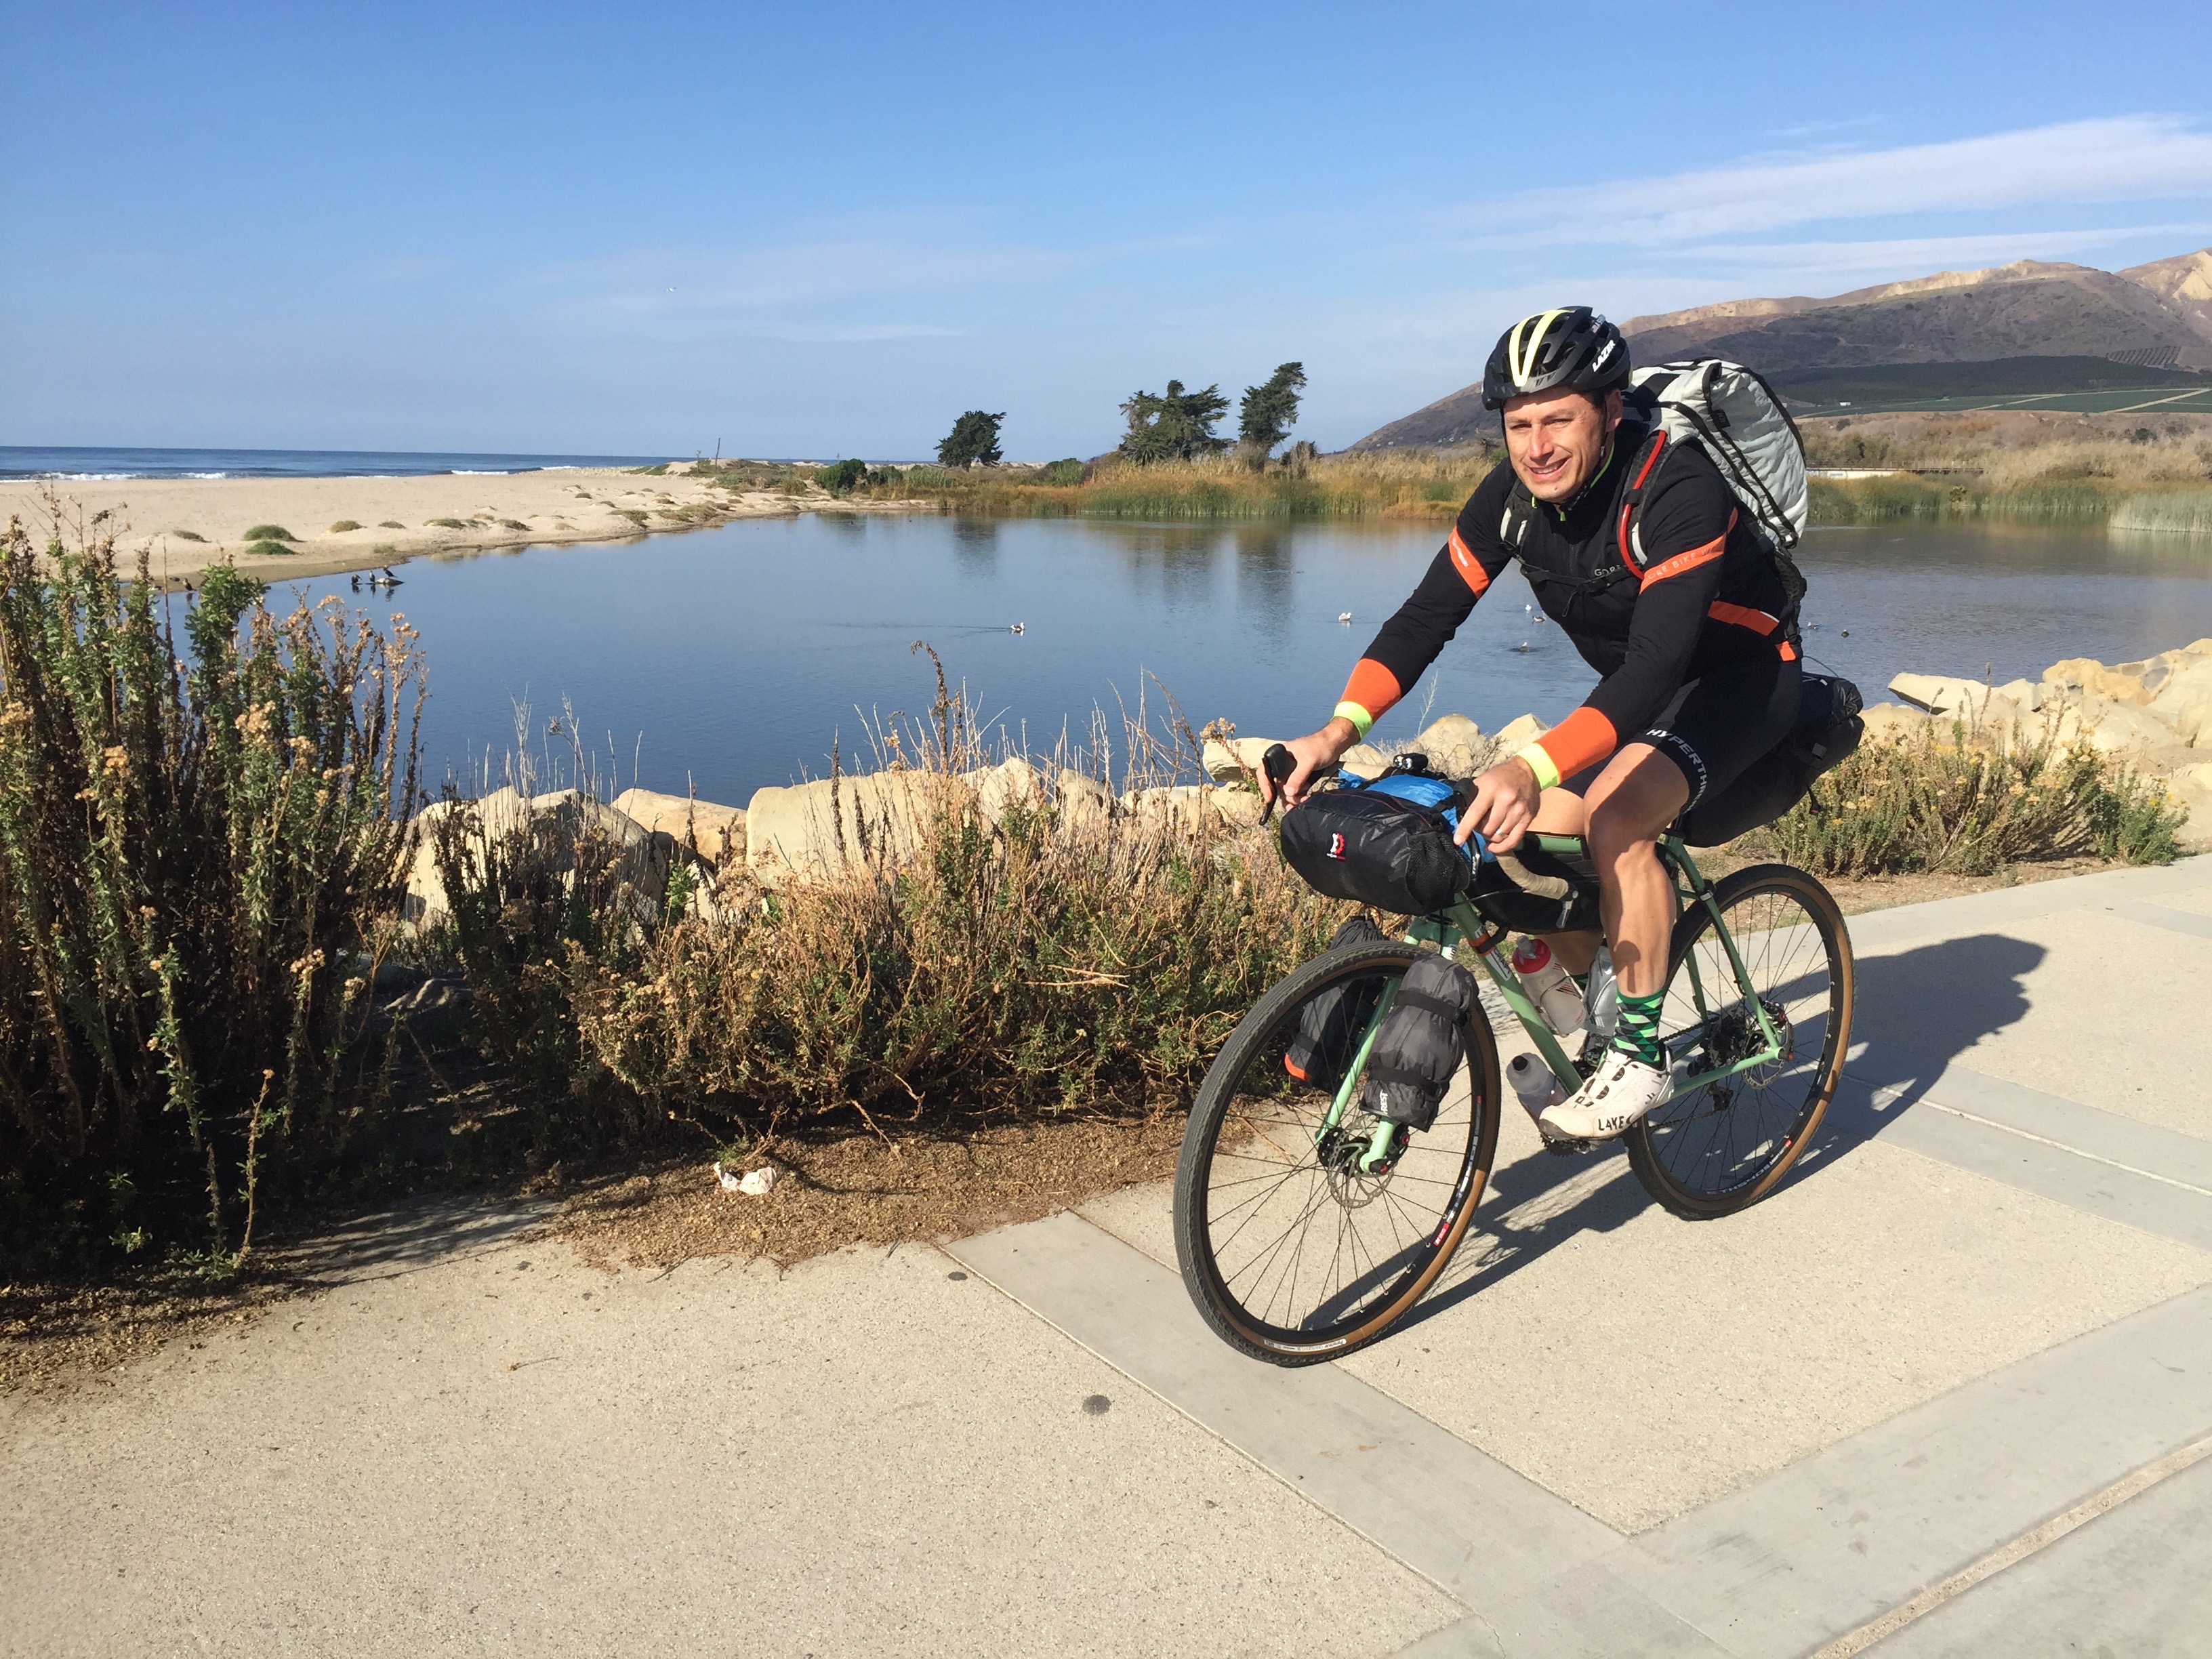 We rode down the coast and here is Aaron entering the bike path in Ventura